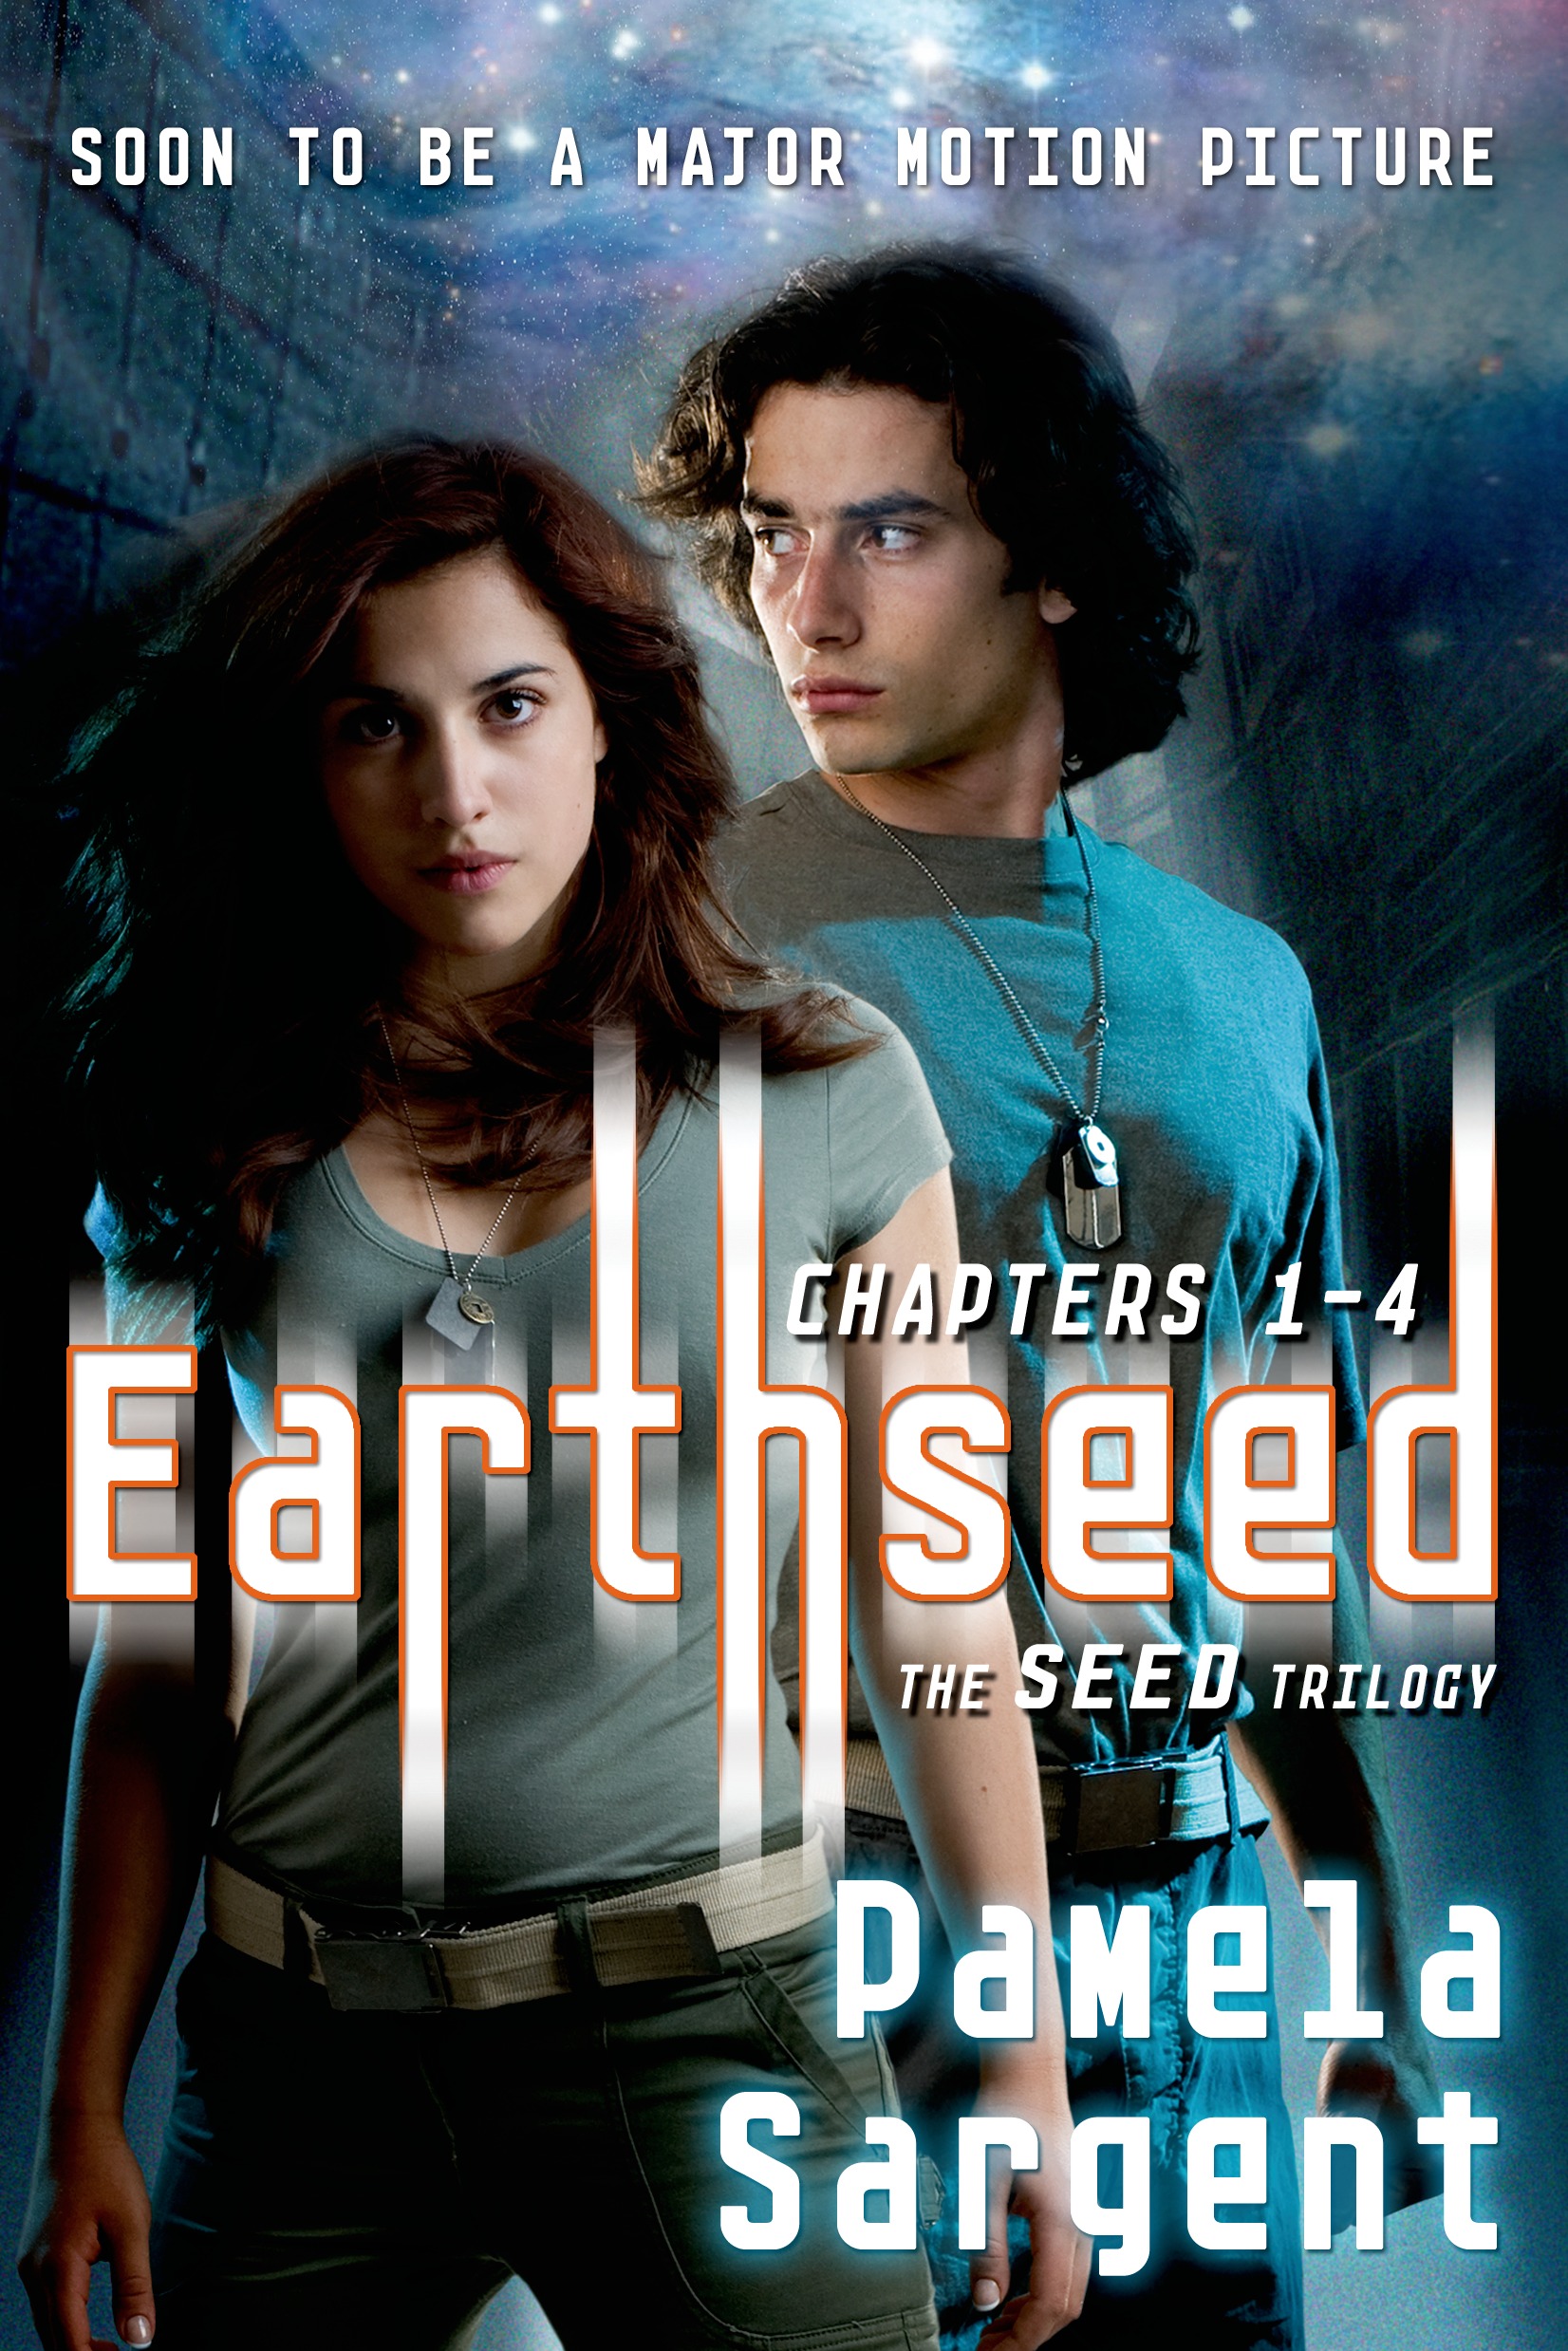 Earthseed: Chapters 1-4 by Pamela Sargent